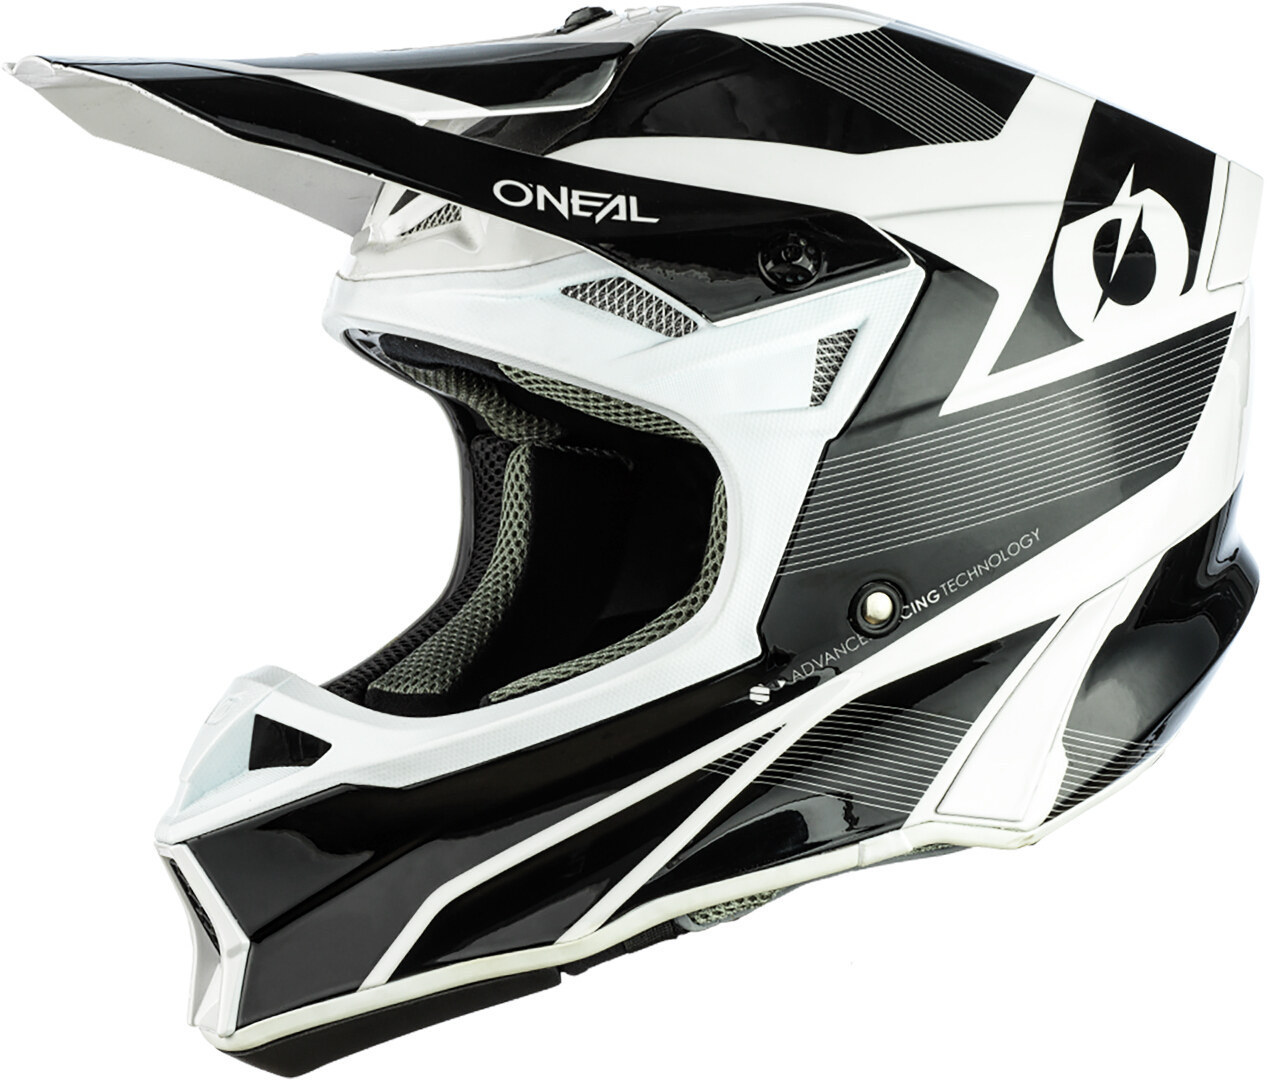 Image of Casque cross O'Neal 10 SERIES - HYPERLITE COMPACT - BLACK WHITE GLOSSY 2021